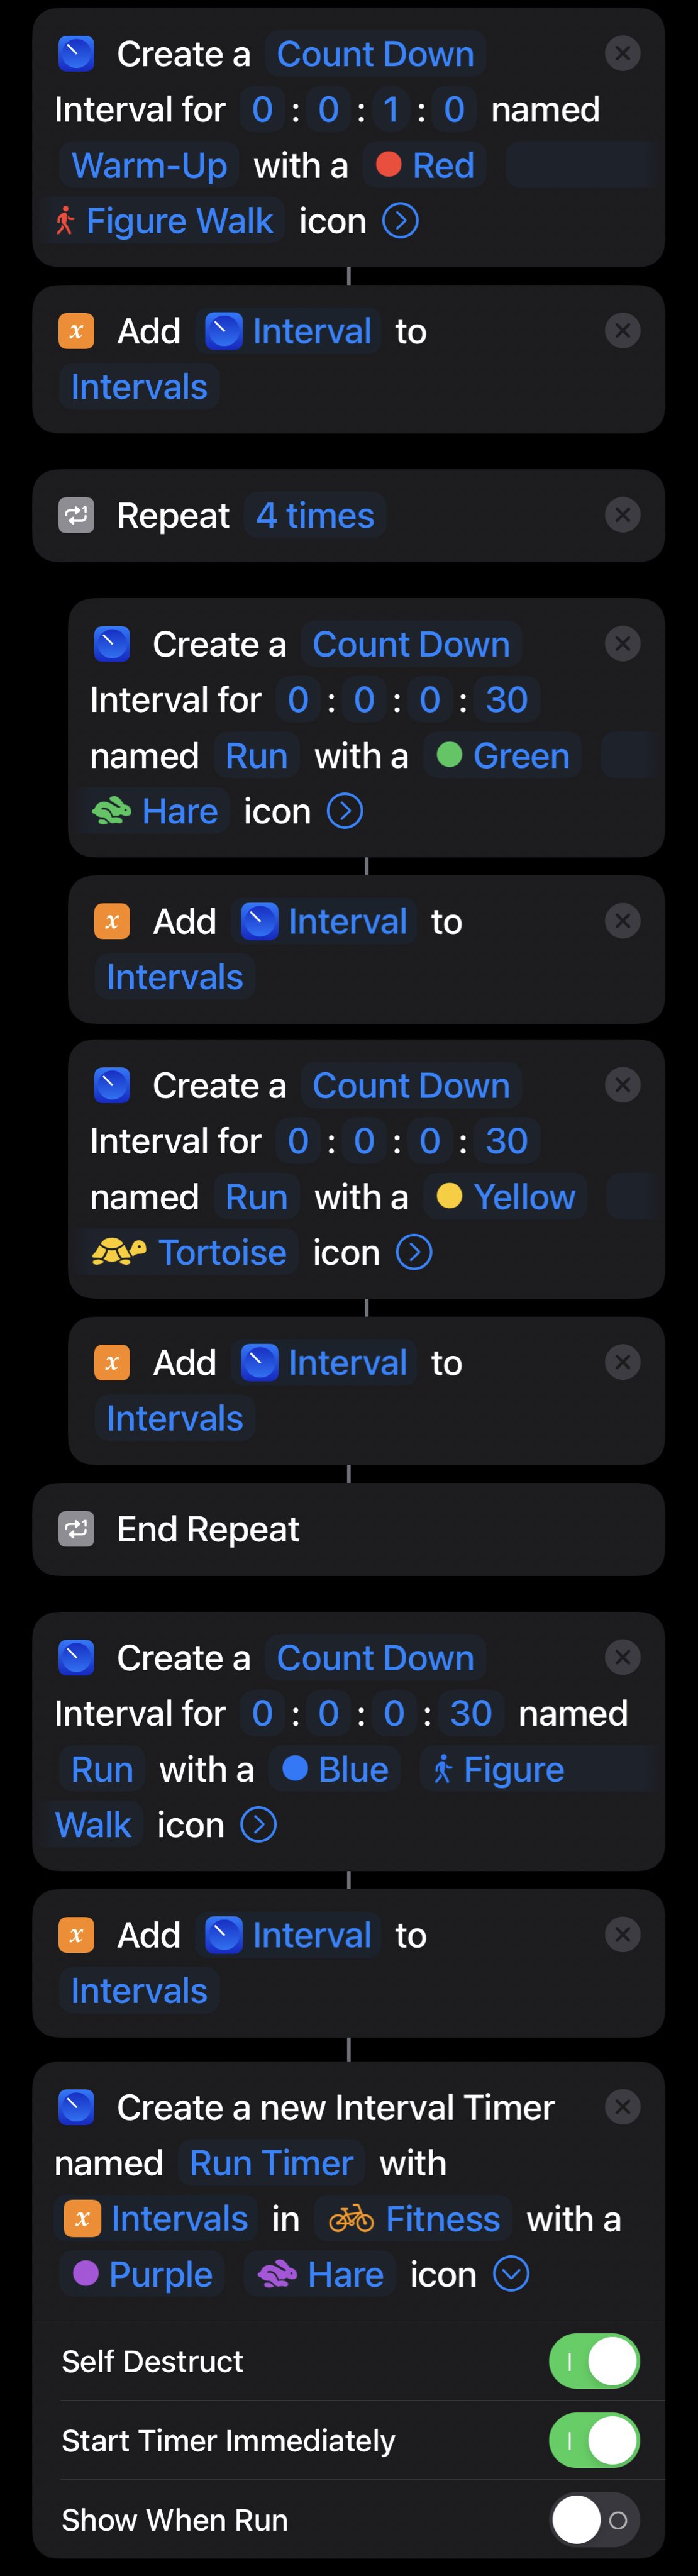 Timers on Twitter: "Start Run Shortcut More complex Interval Timer, add each interval to a variable and pass them into a New Interval Timer to create exercise routines (try randomizing it